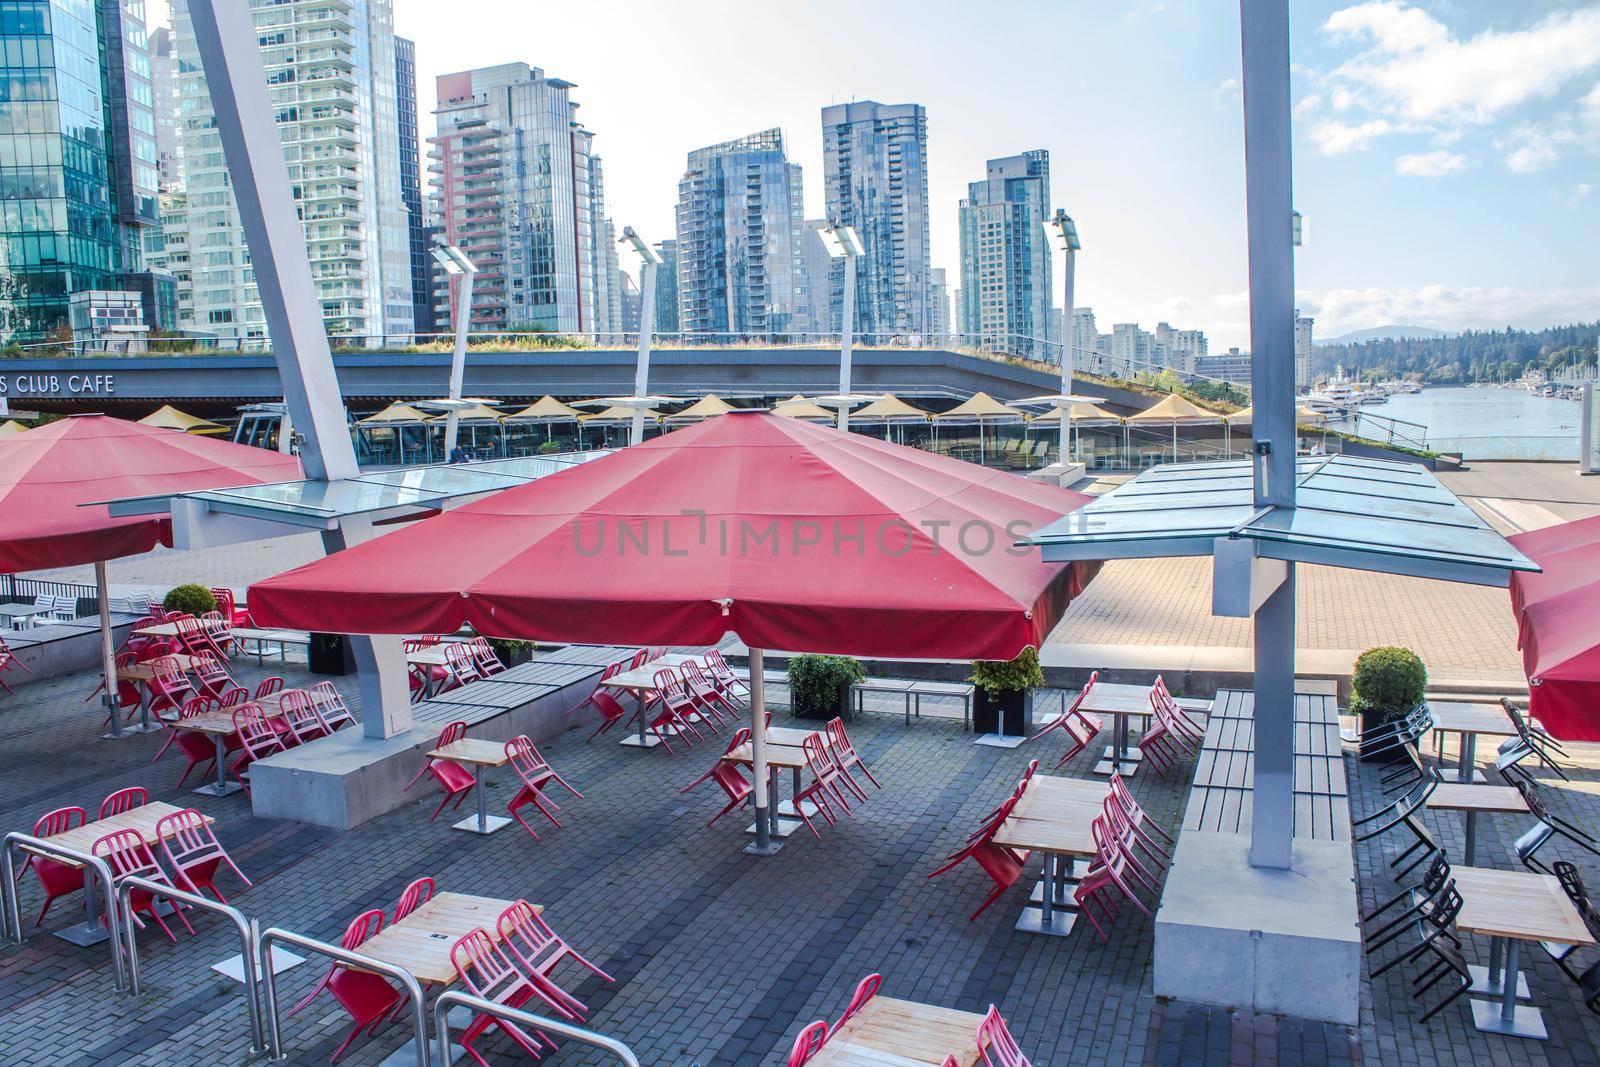 Vancouver, British Columbia, Canada - September 2, 2020: Tap and Barrel restaurant in Olympic Village, Convention Centre